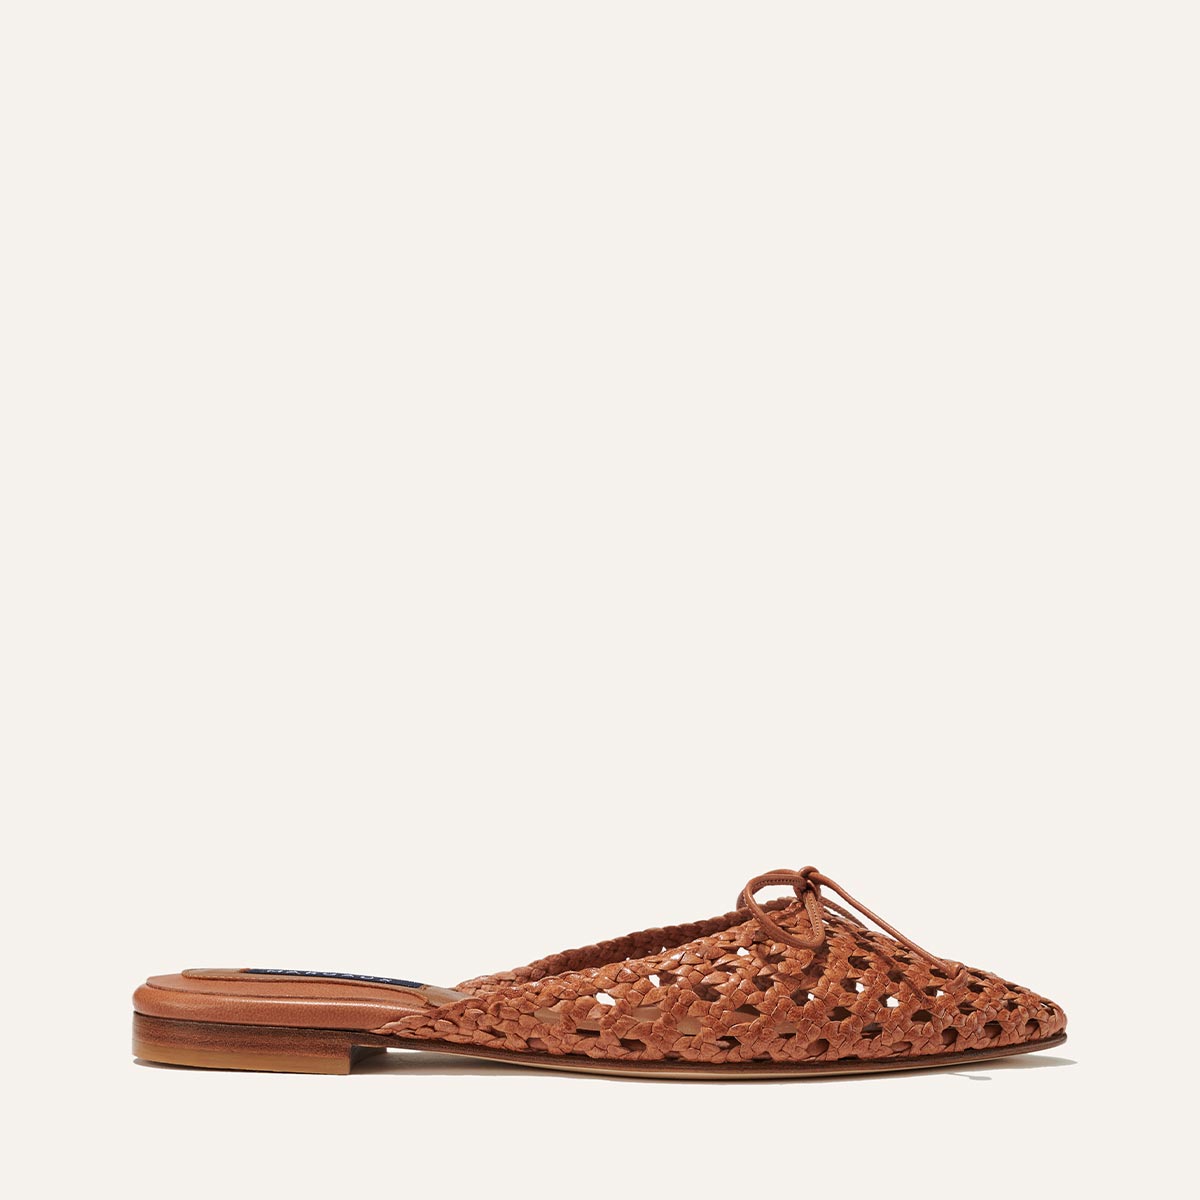 The Woven Ballet Mule - Saddle Leather